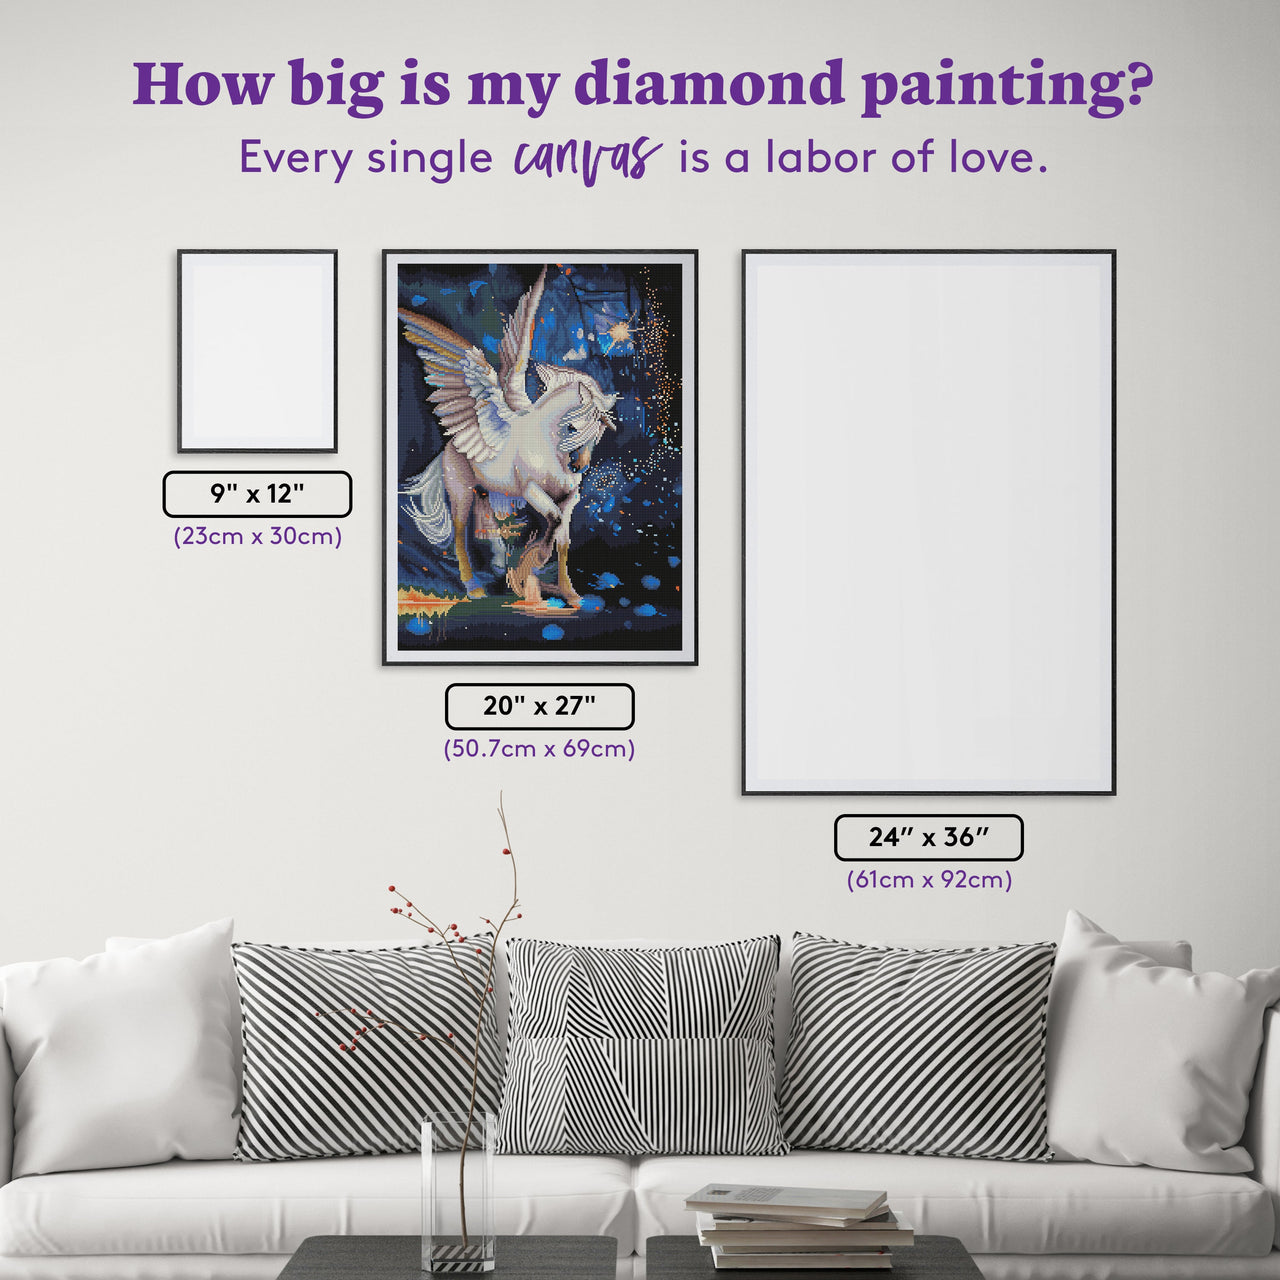 Diamond Painting Light Dancer 20" x 27" (50.7cm x 69cm) / Round With 47 Colors Including 3 ABs / 44,526